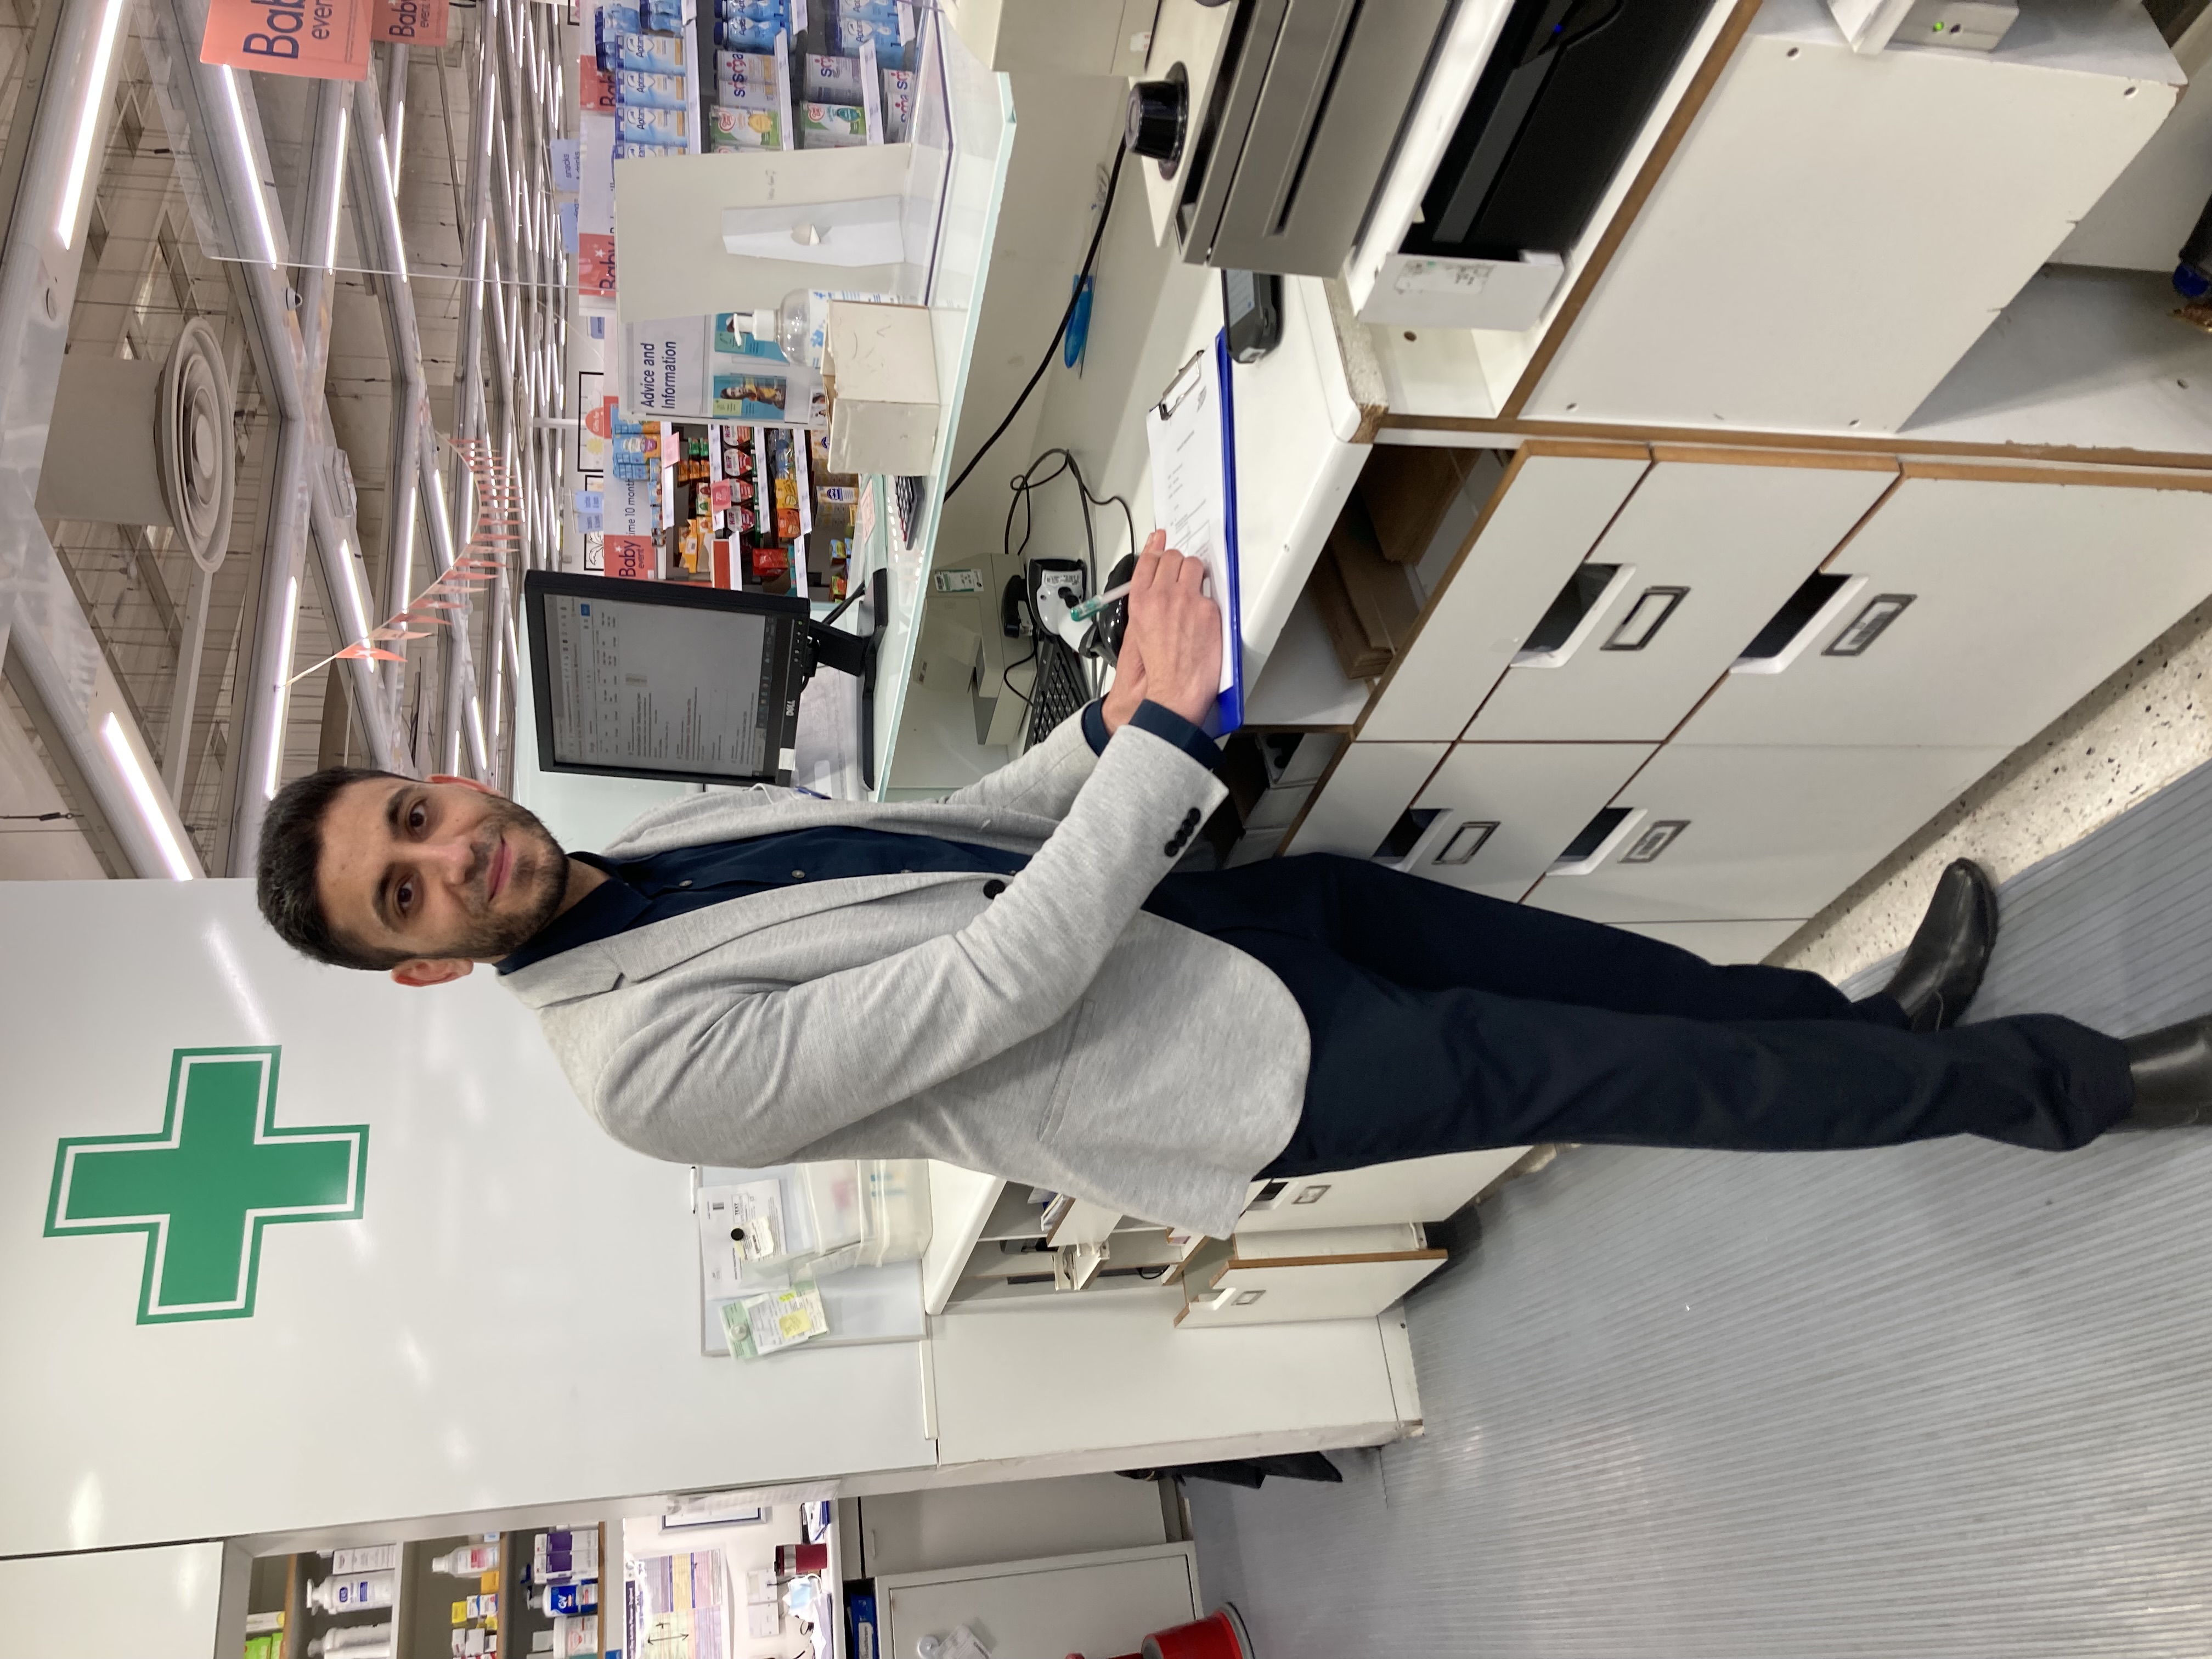 Community Pharmacy careers and the journey to becoming a Healthcare Academy Trainer at Boots – Uwais’ story